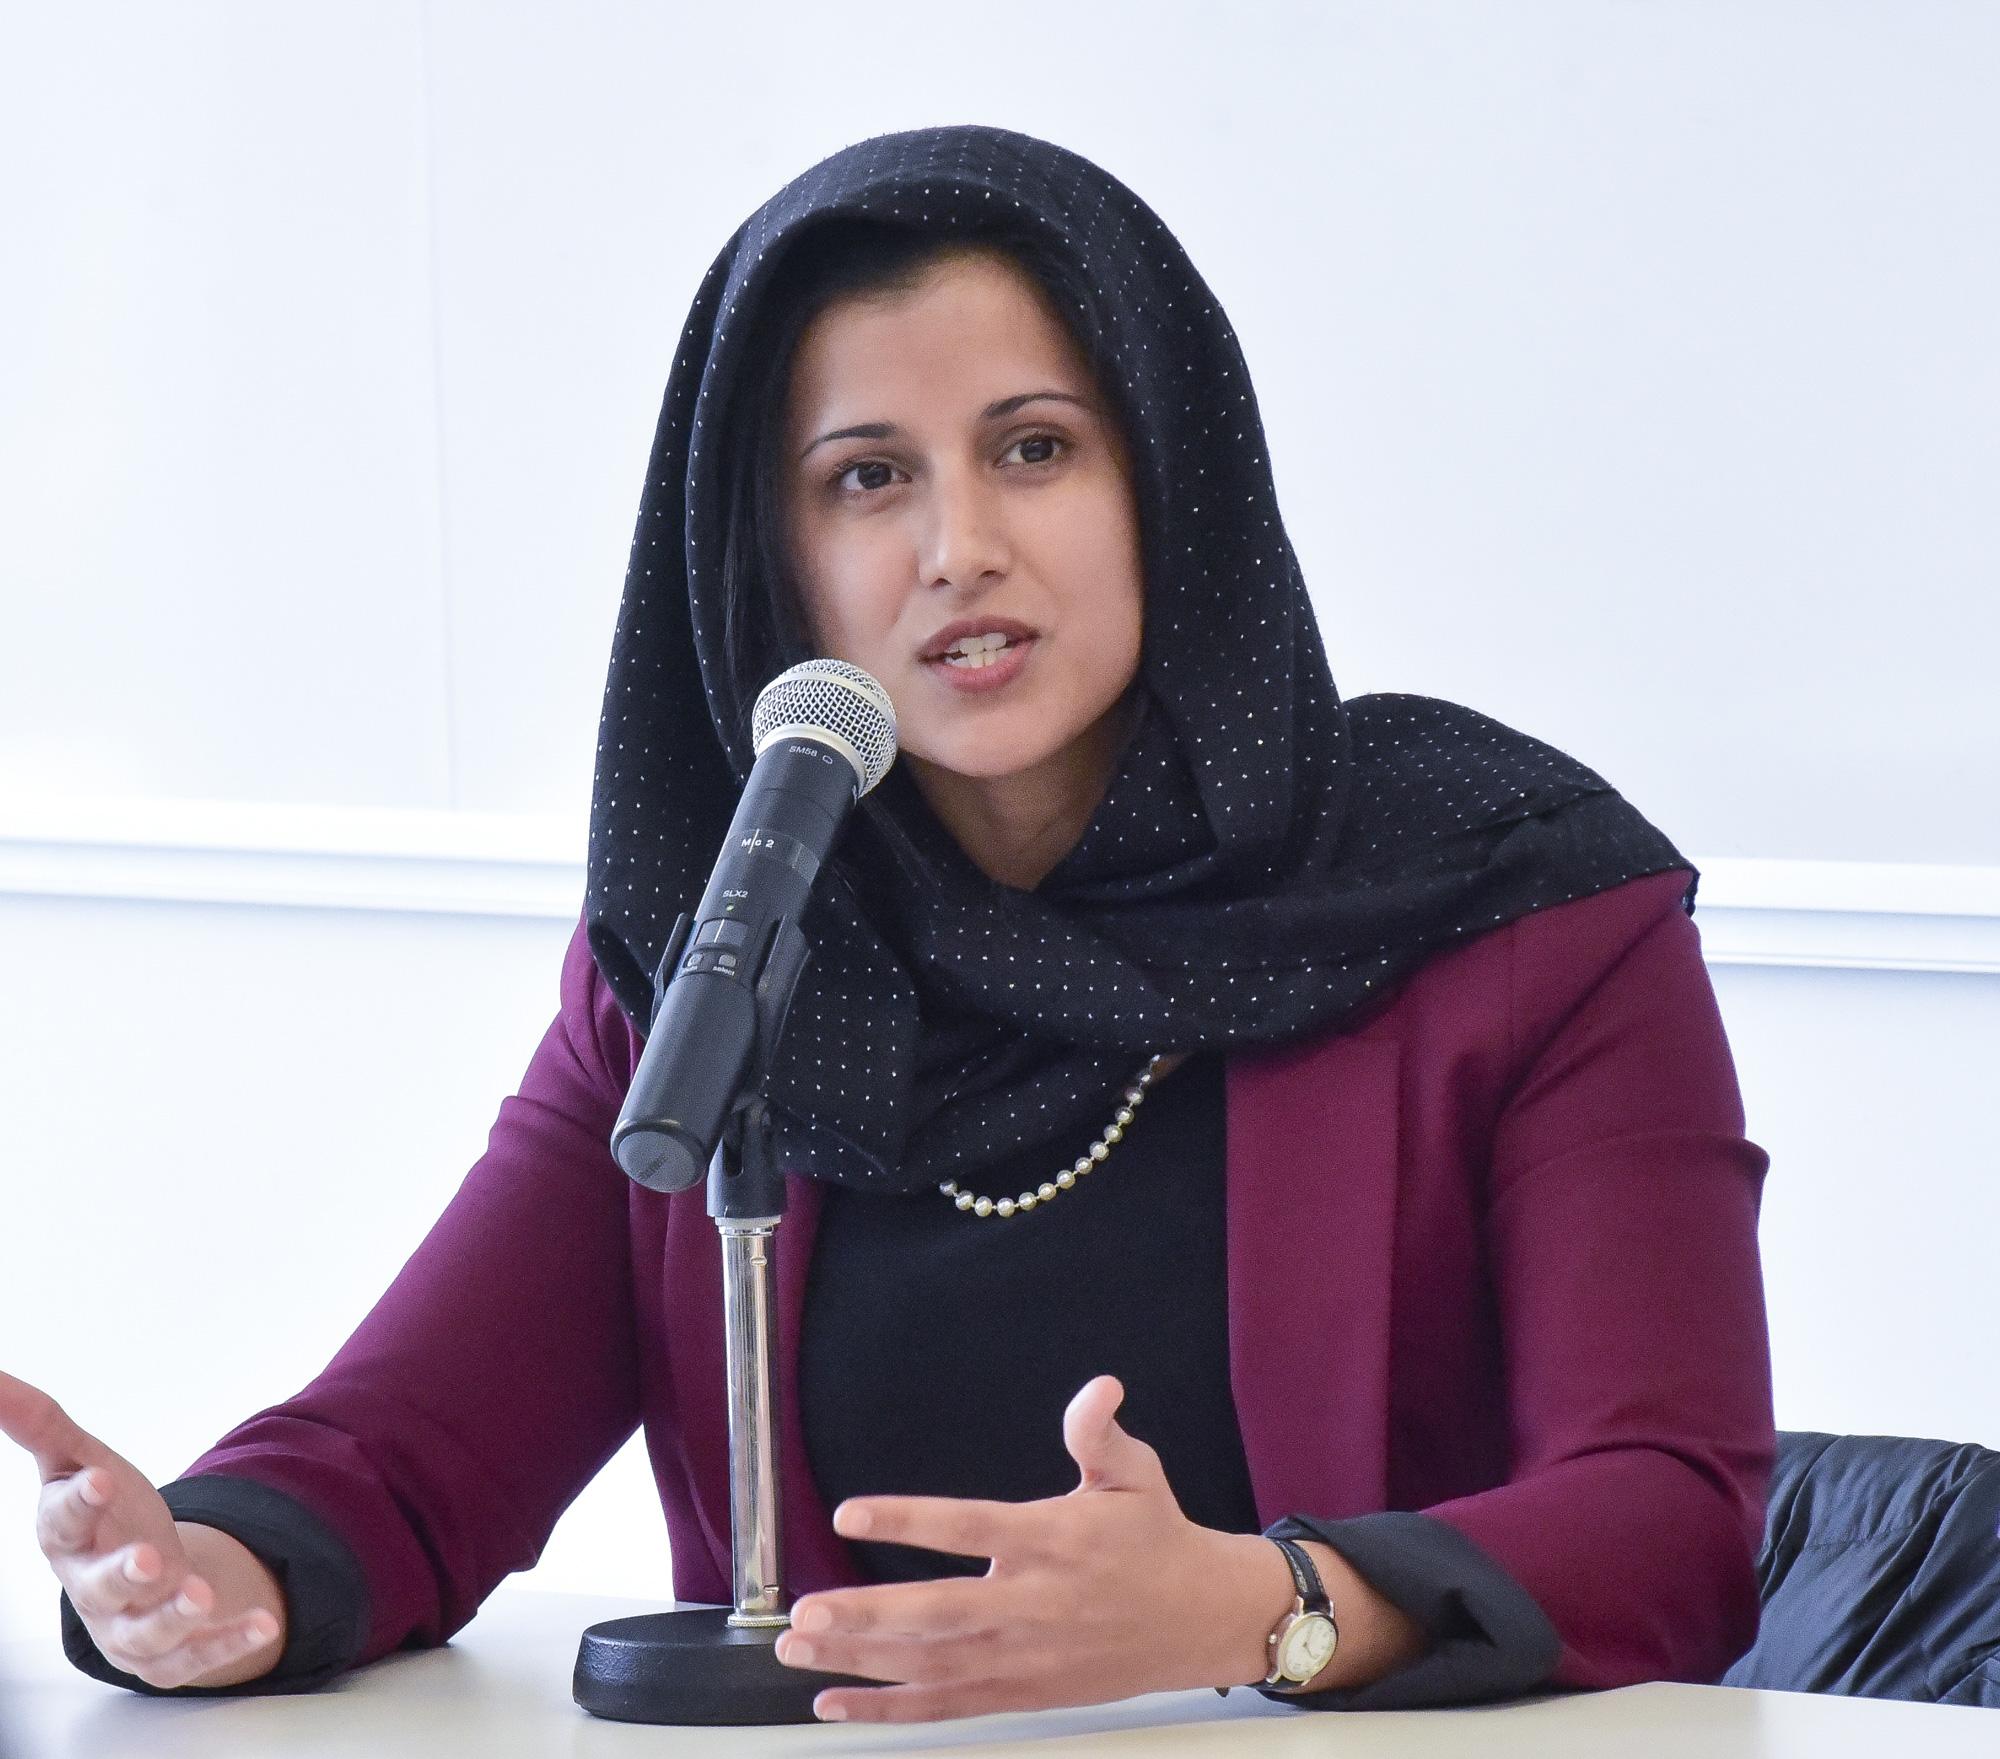 Congratulations to Professor Aisha Ahmad for receiving the 2023-2024 International Studies Association (ISA) Emerging Scholar Award in International Security Studies. Each year, ISA presents numerous awards to acknowledge exceptional scholarly contributions within the realm of international studies. These awards commend remarkable papers, books, achievements, and service contributions.